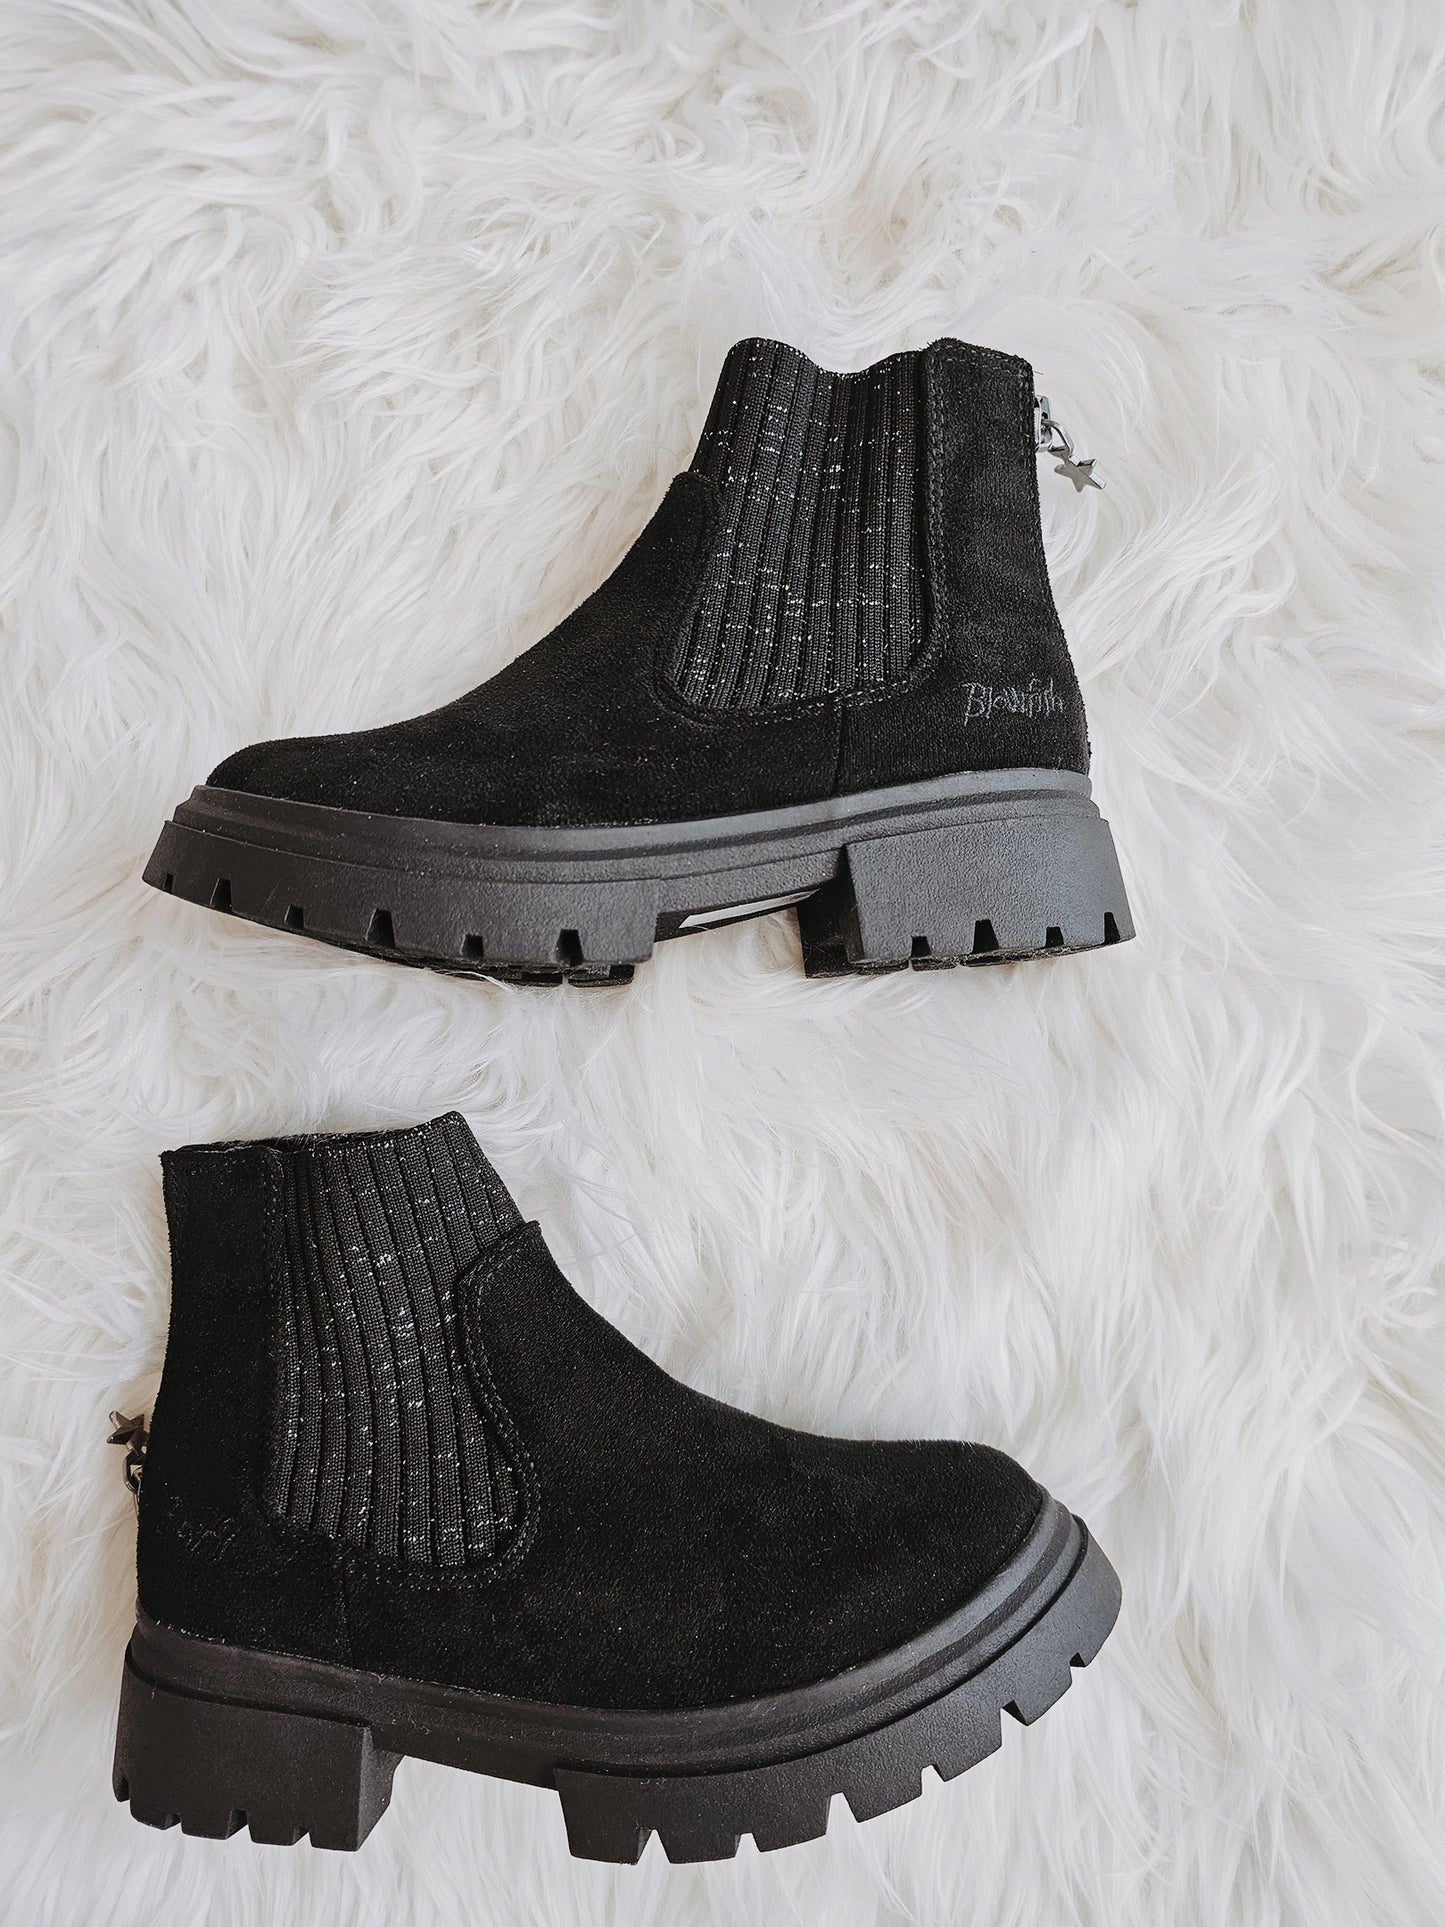 Girls Blowfish Chassis K Boot in Black